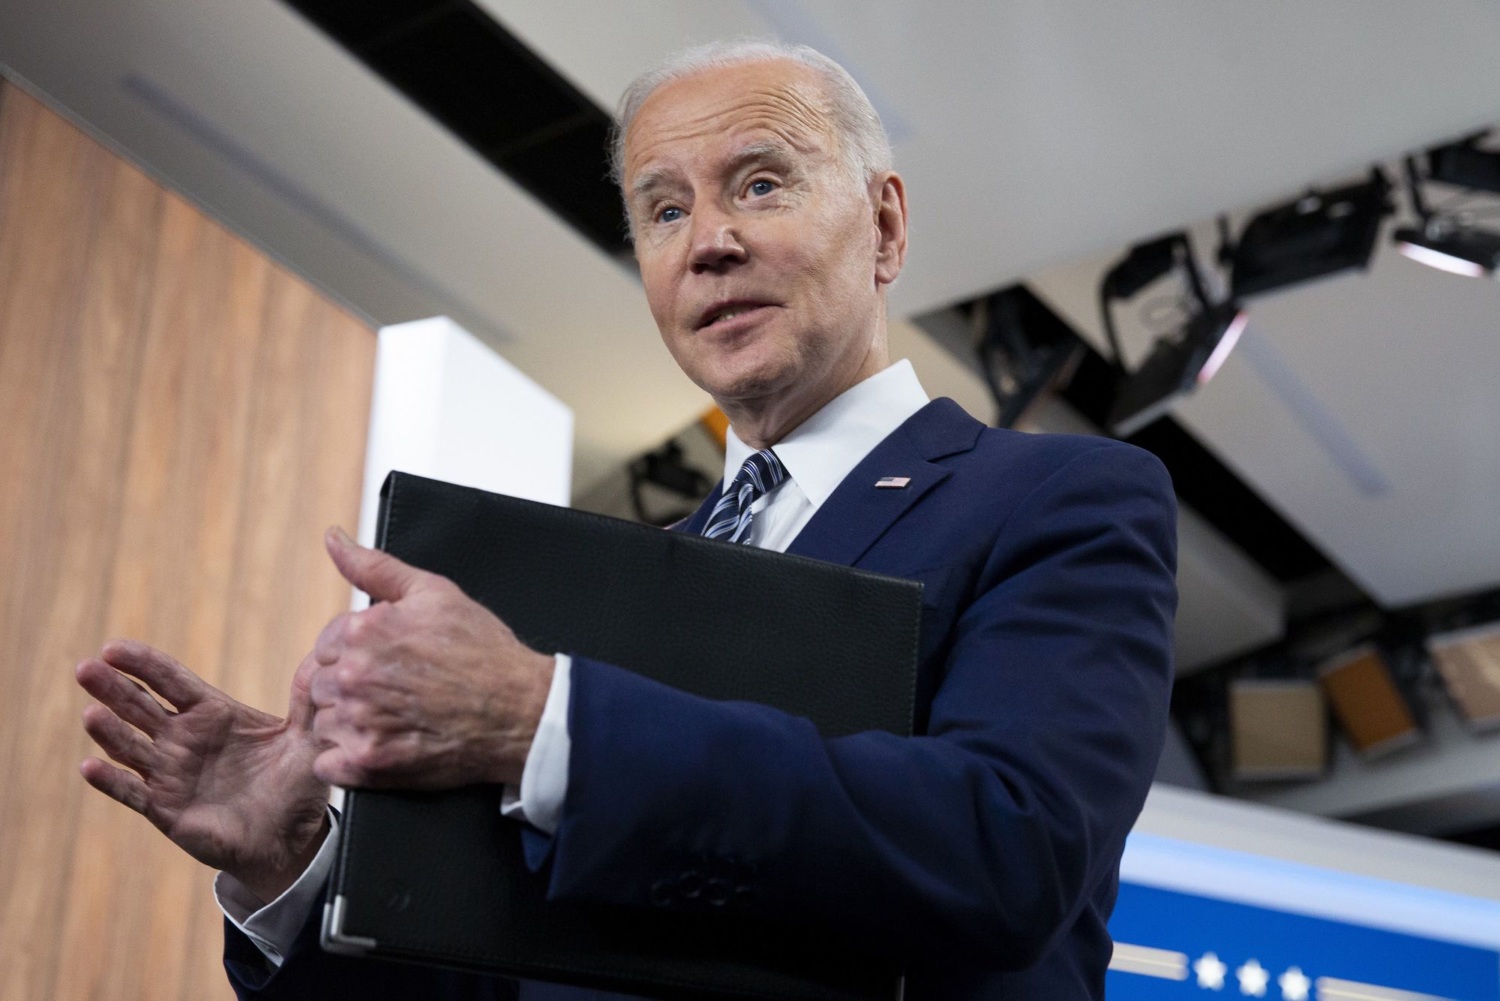 66% of Independents Support Biden’s Plan to Lower Energy, Prescription Costs